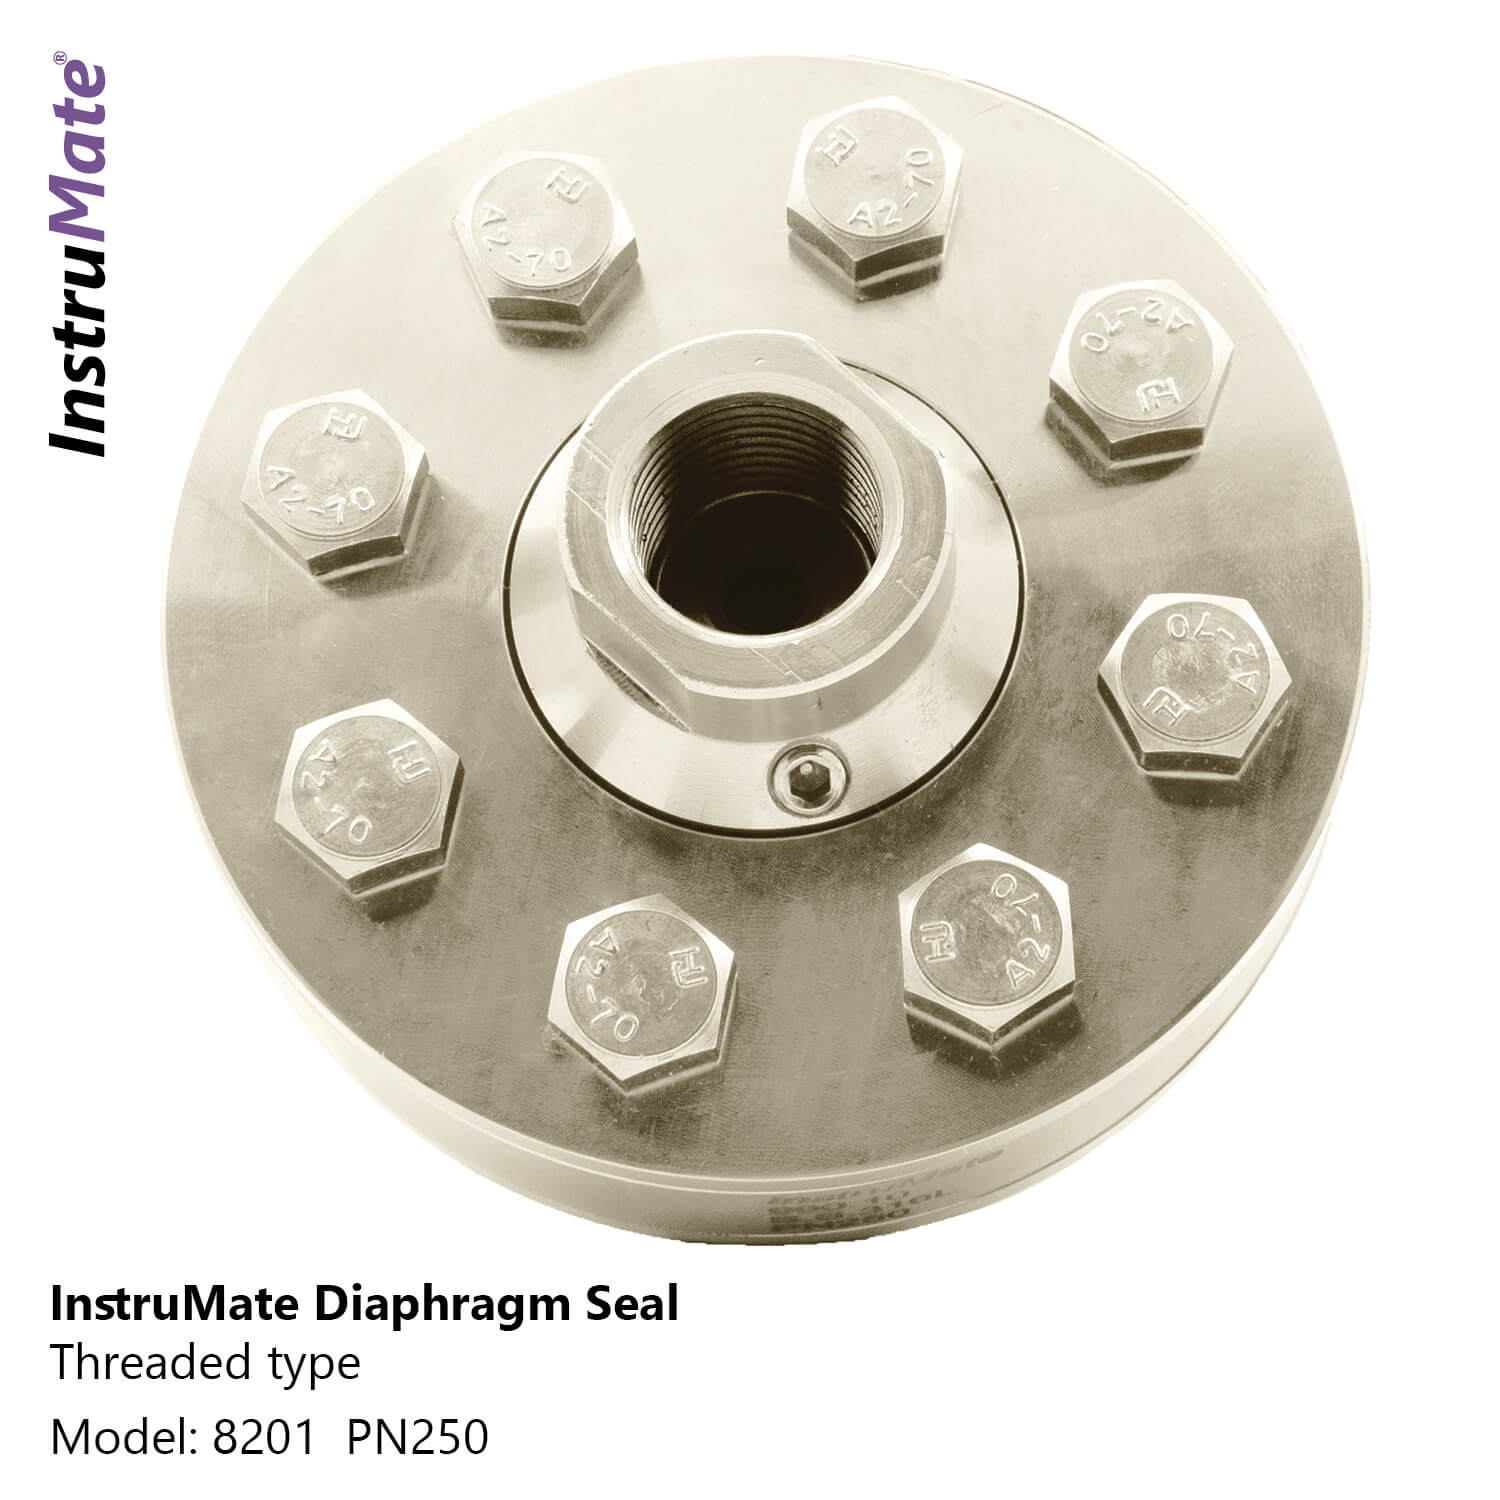 Diaphragm seal with threaded connection - 8201 - InstruMate